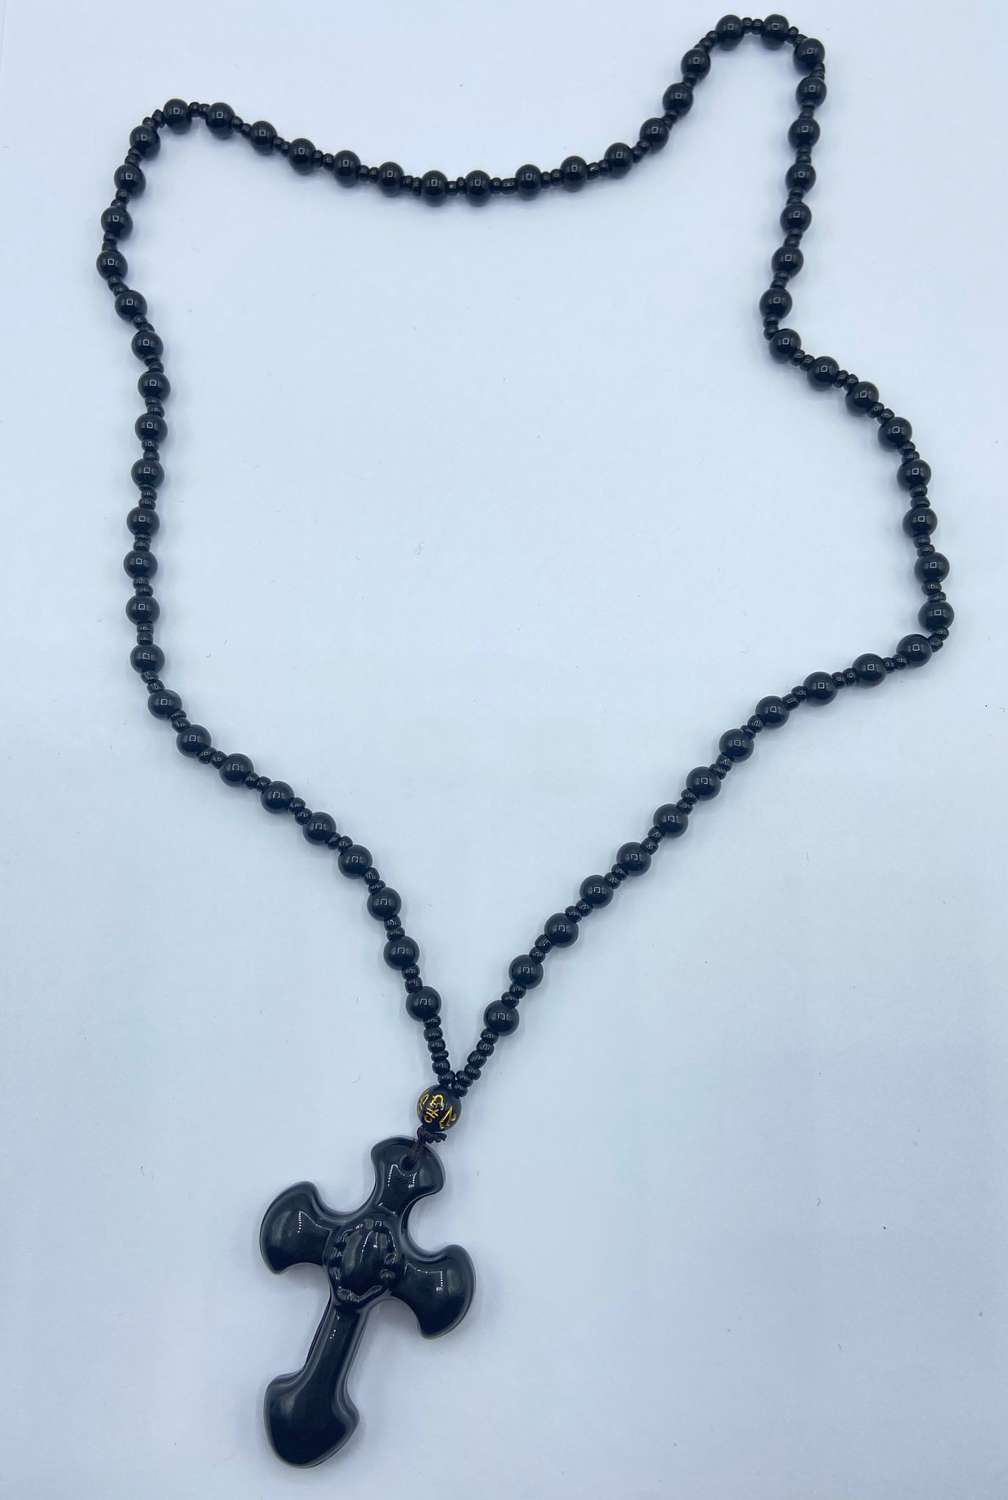 Vintage Black Obsidian Religious Cross Beaded Gothic Necklace